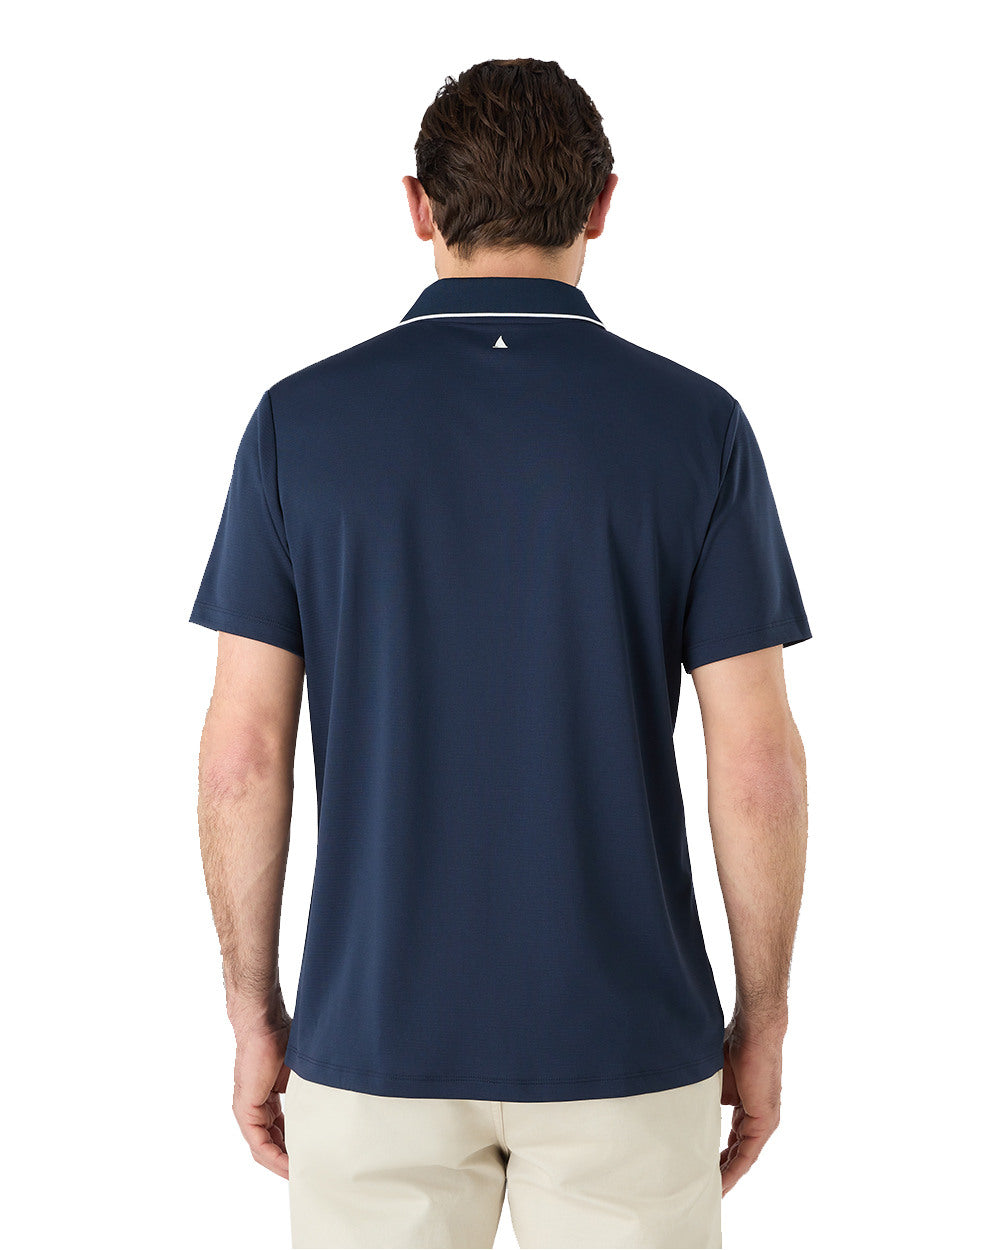 Navy Coloured Musto Mens 1964 Short Sleeve Polo Shirt On A White Background 